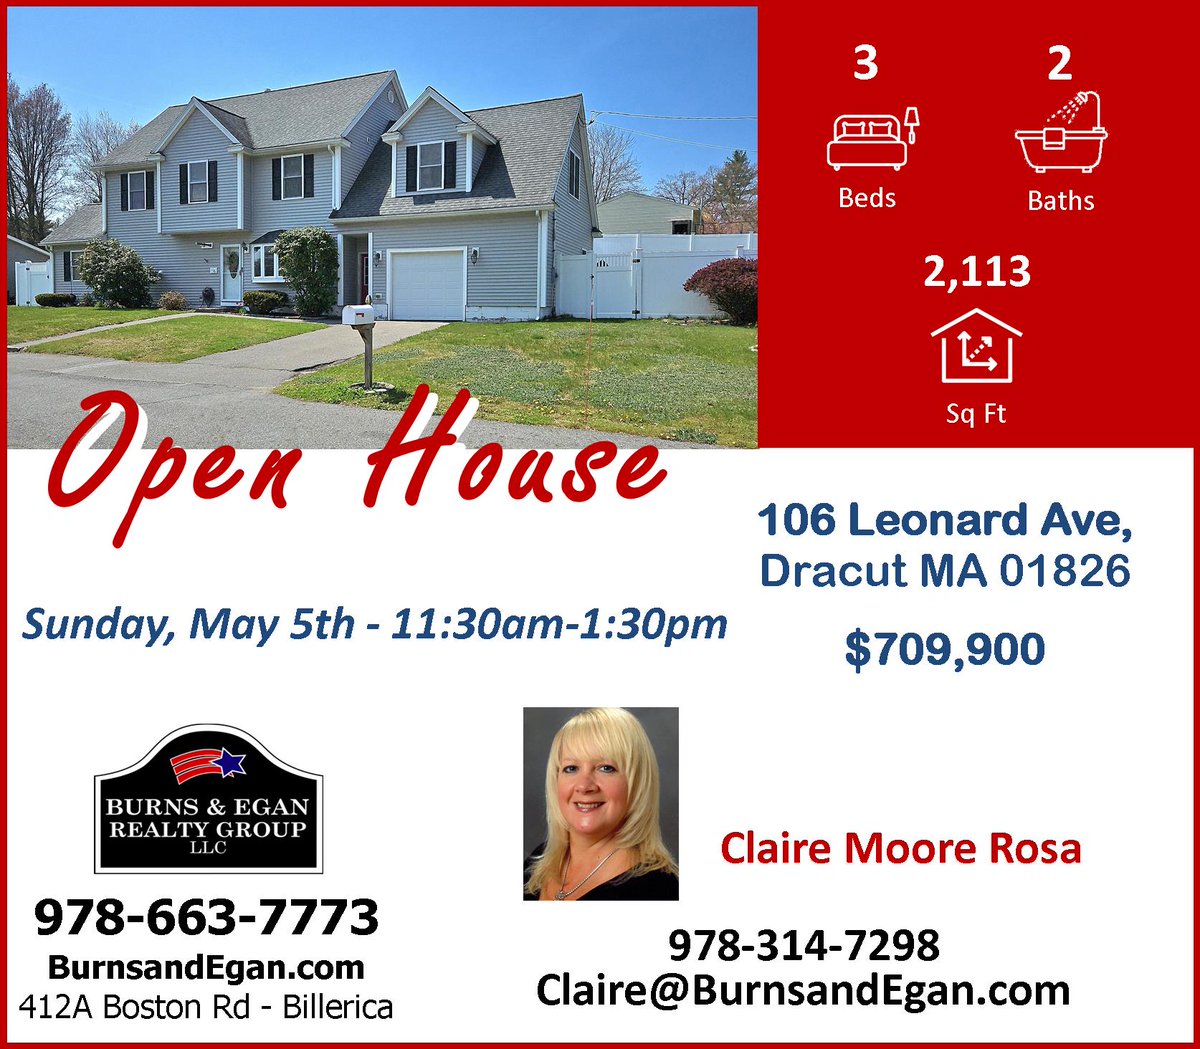 Open House This Saturday! 

burnsandegan.com/listings/106-L…

#Dracutrealestate  #DracutMA  #realestatemarket #DracutMAhomes #homesforsale #homeownership #realestate #burnsandegan  #dreamhome #forsale #househunting #homes #newhome #newconstruction #townhomes #openhouse